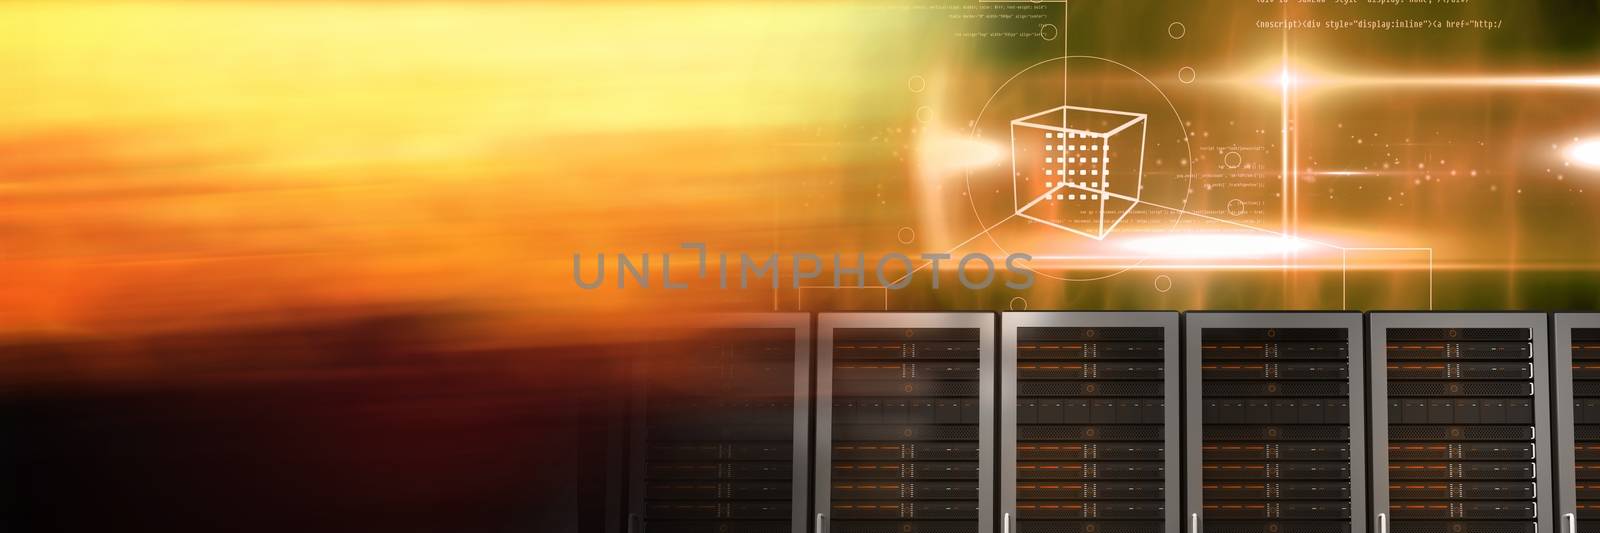 Digital composite of Computer servers and technology information interface transition